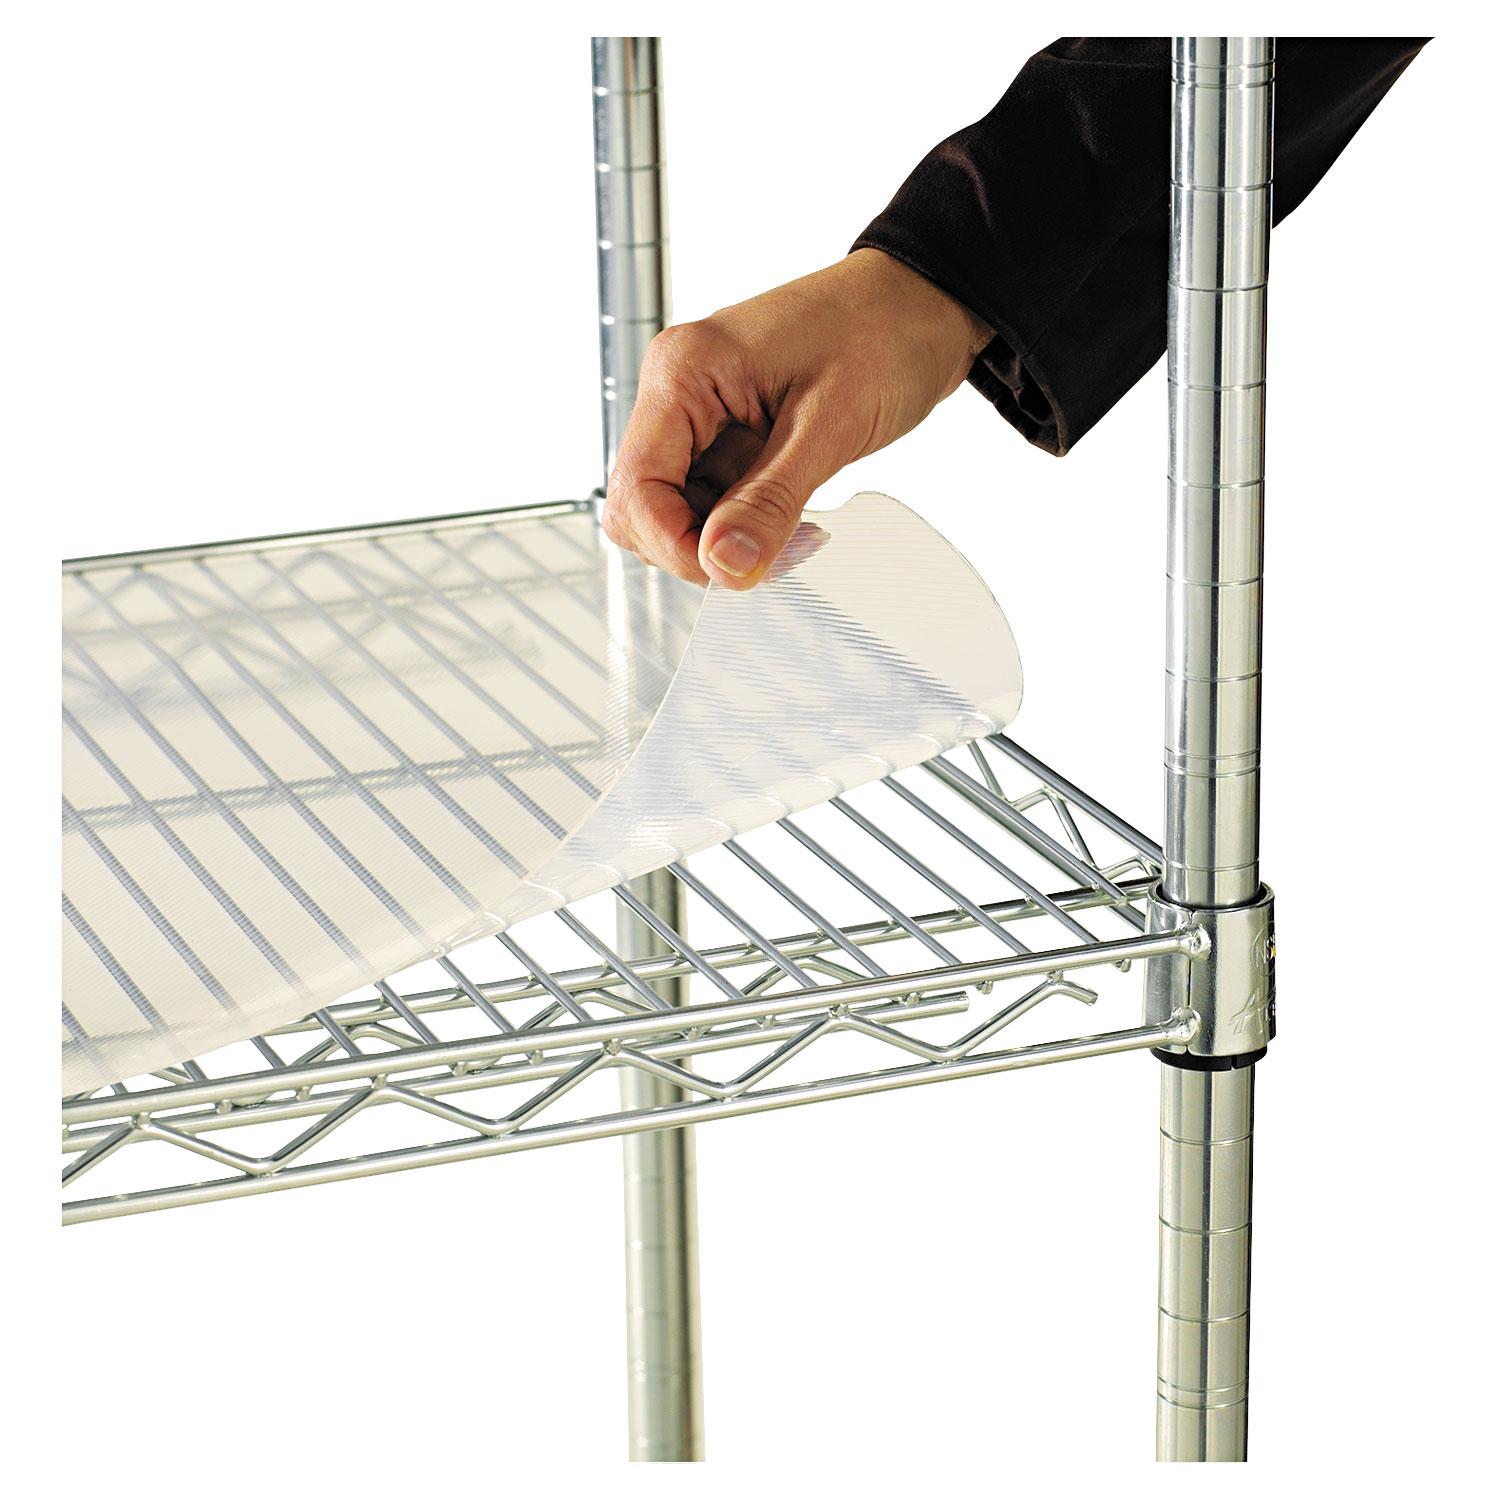  Alera ALESW59SL3624 Shelf Liners For Wire Shelving, Clear Plastic, 36w x 24d, 4/Pack (ALESW59SL3624) 